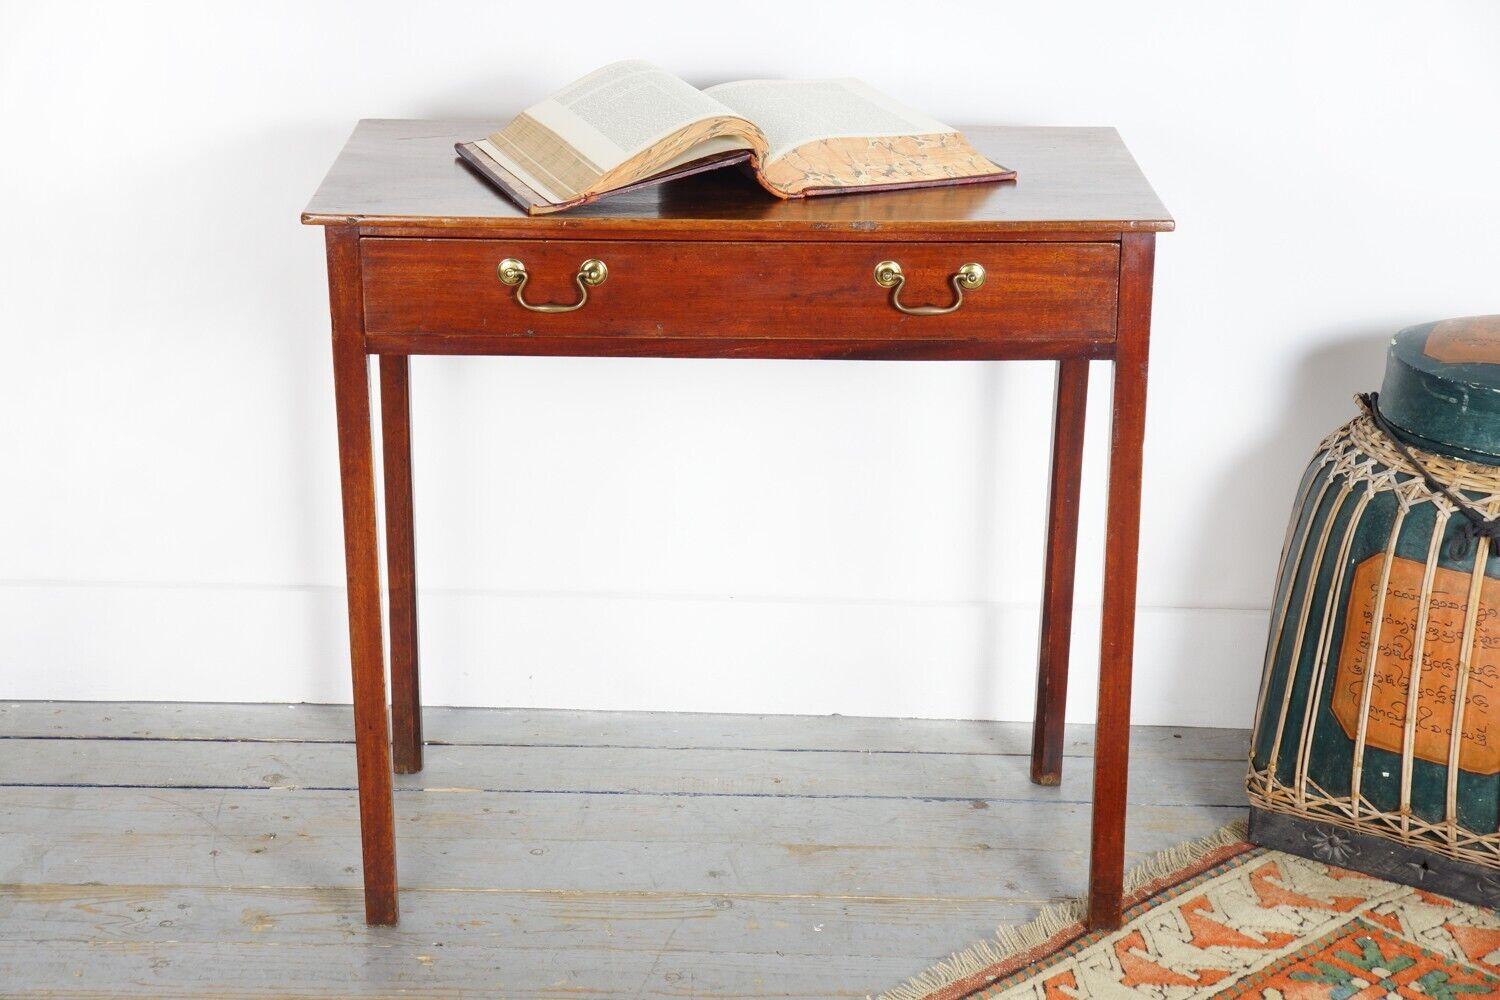 Antique Side Table

An early 19th century English compact side table or writing desk.

Oak side table with single drawer with two brass swan neck handles.

Dimensions (cm): 

75 H x 80 W x 43 D 